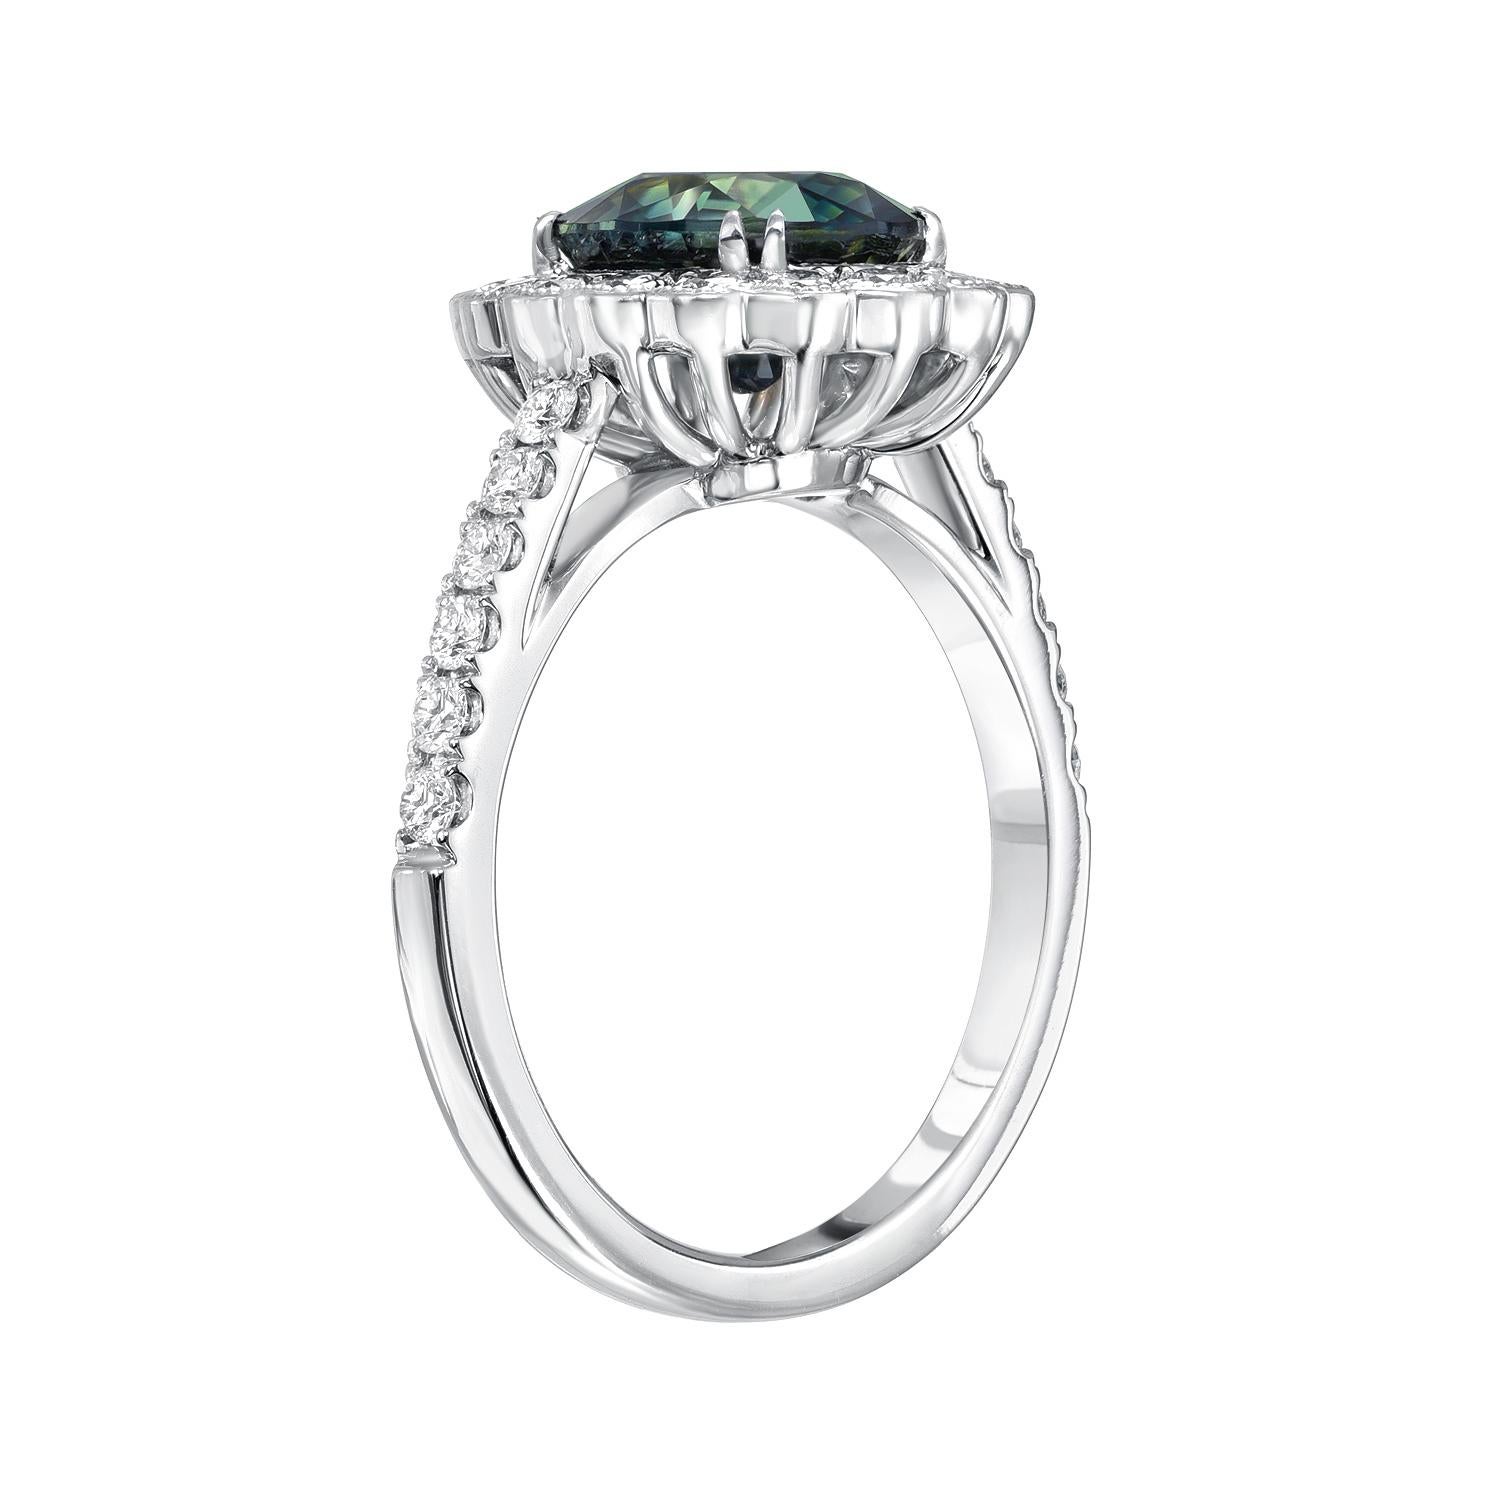 Unique 2.80 carat Green Sapphire oval, unveiled in a 0.63 carat diamond ring in 18K white gold.
Ring size 6.5. Resizing is complementary upon request.
Crafted by extremely skilled hands in the USA.
Returns are accepted and paid by us within 7 days